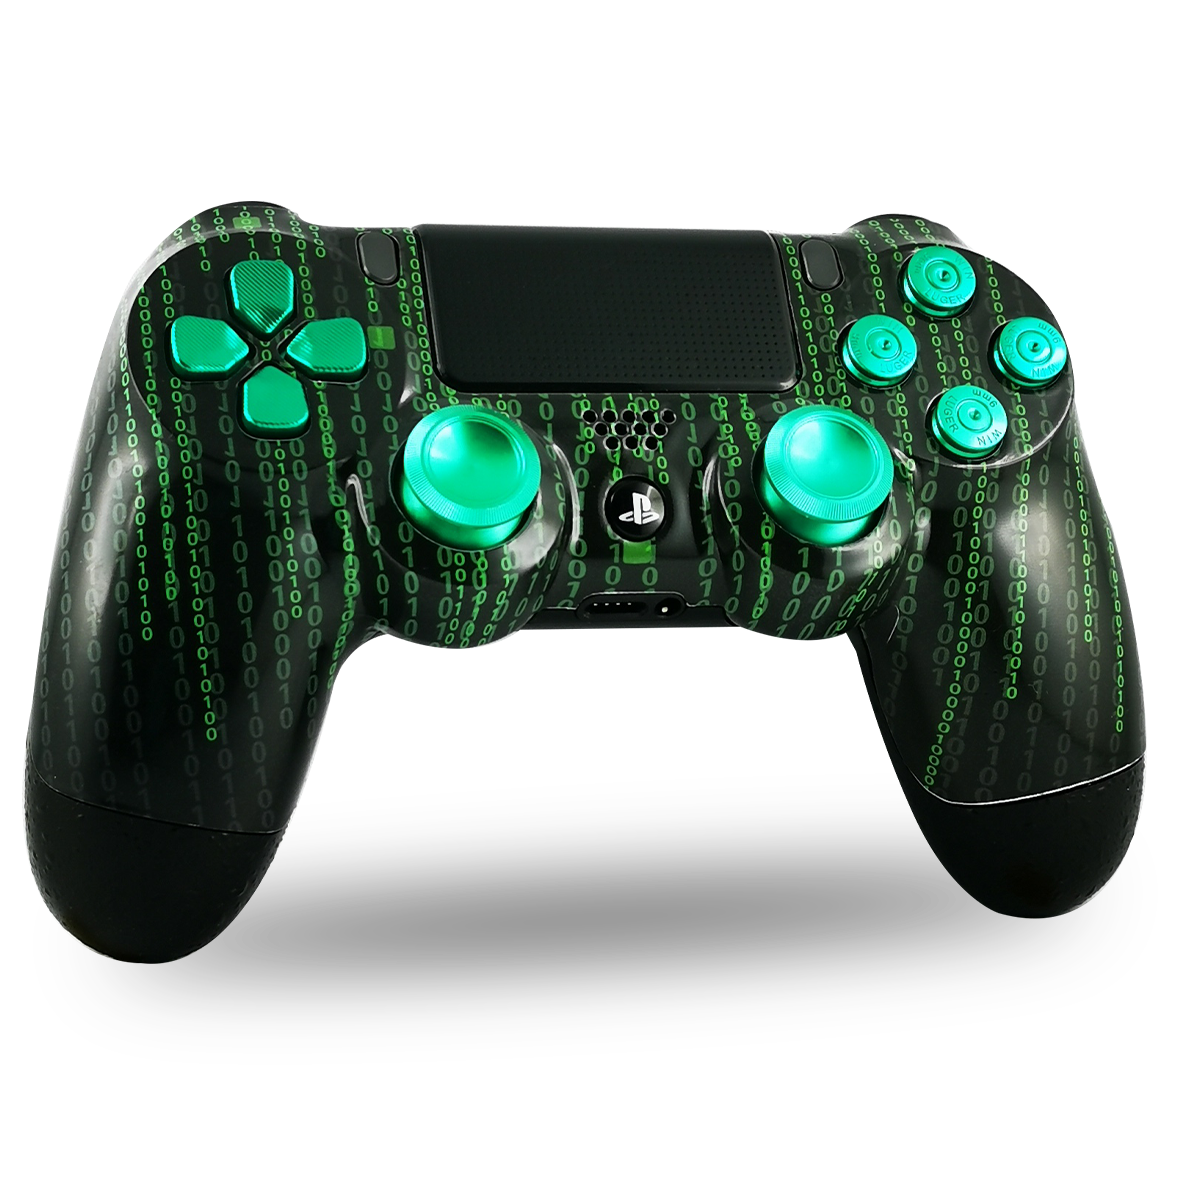 manette-PS4-custom-playstation-4-sony-personnalisee-drawmypad-inconnu21